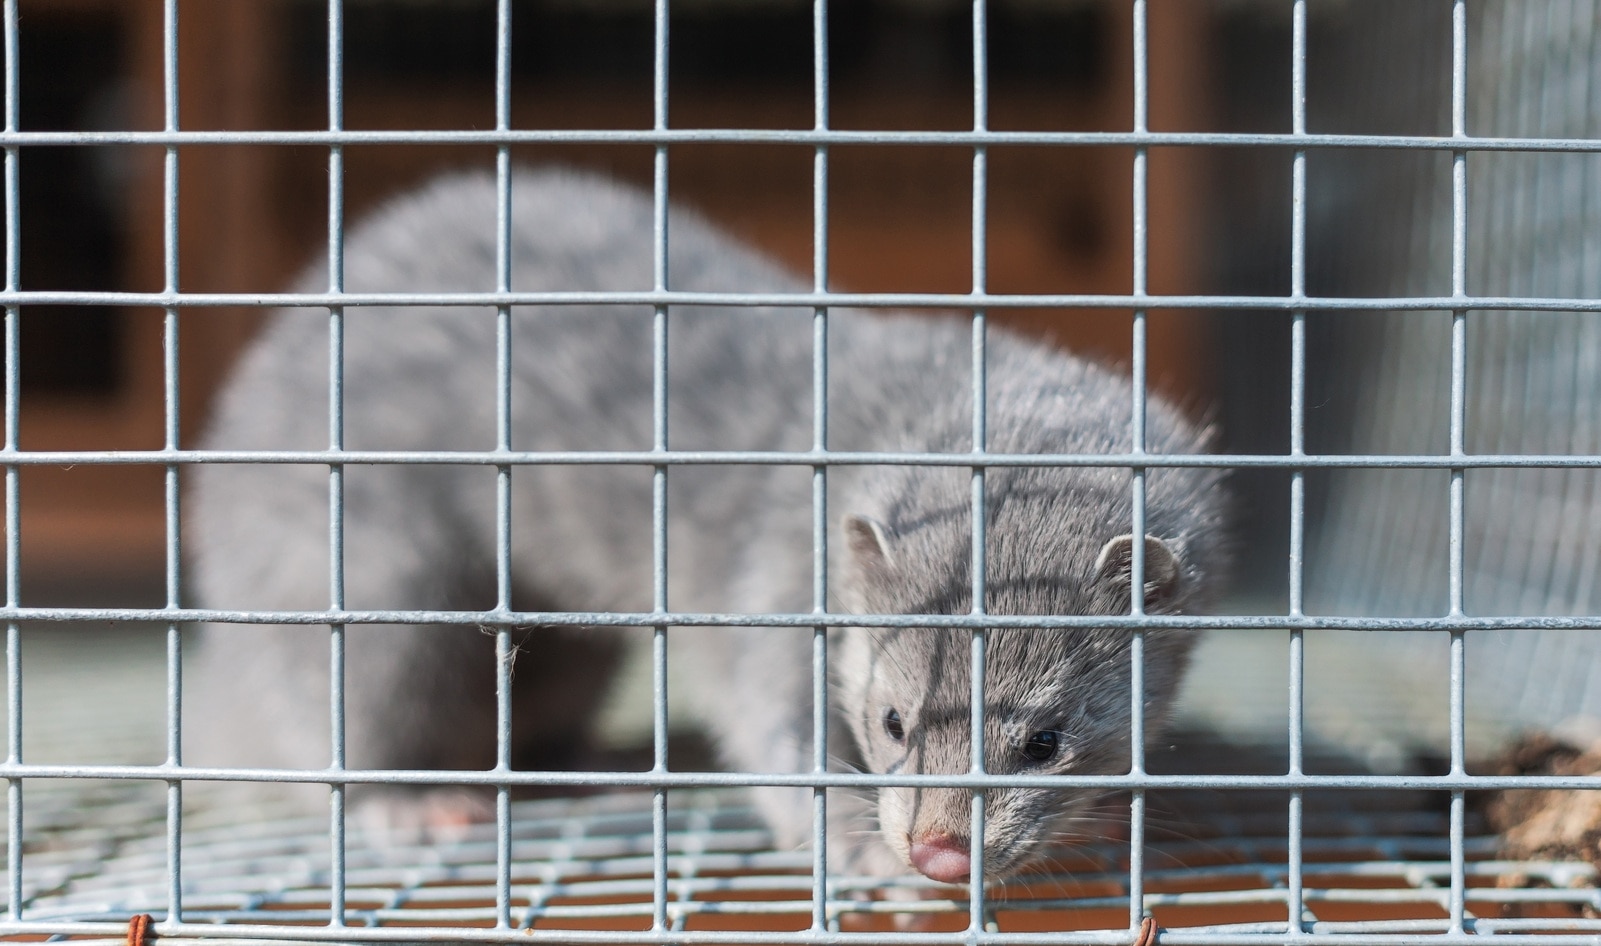 Mink Fur Farms May Have Infected Humans with COVID-19, Dutch Officials Report